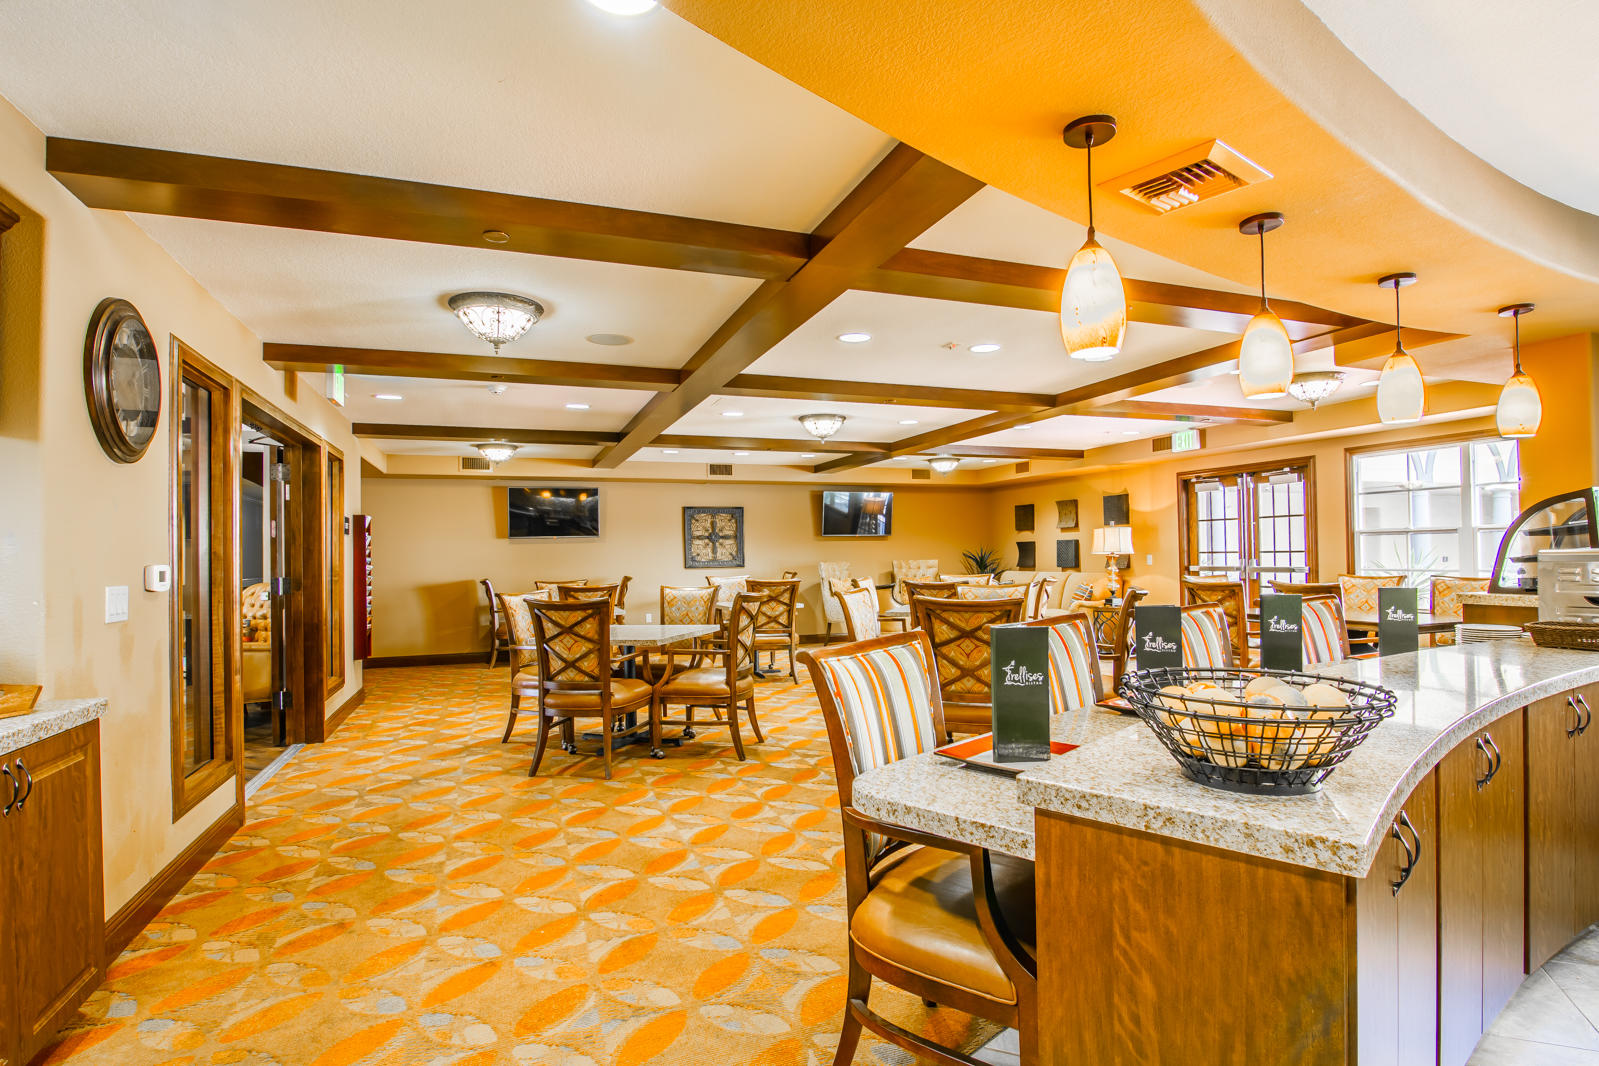 The Remington Club boasts a spacious dining area for our seniors!